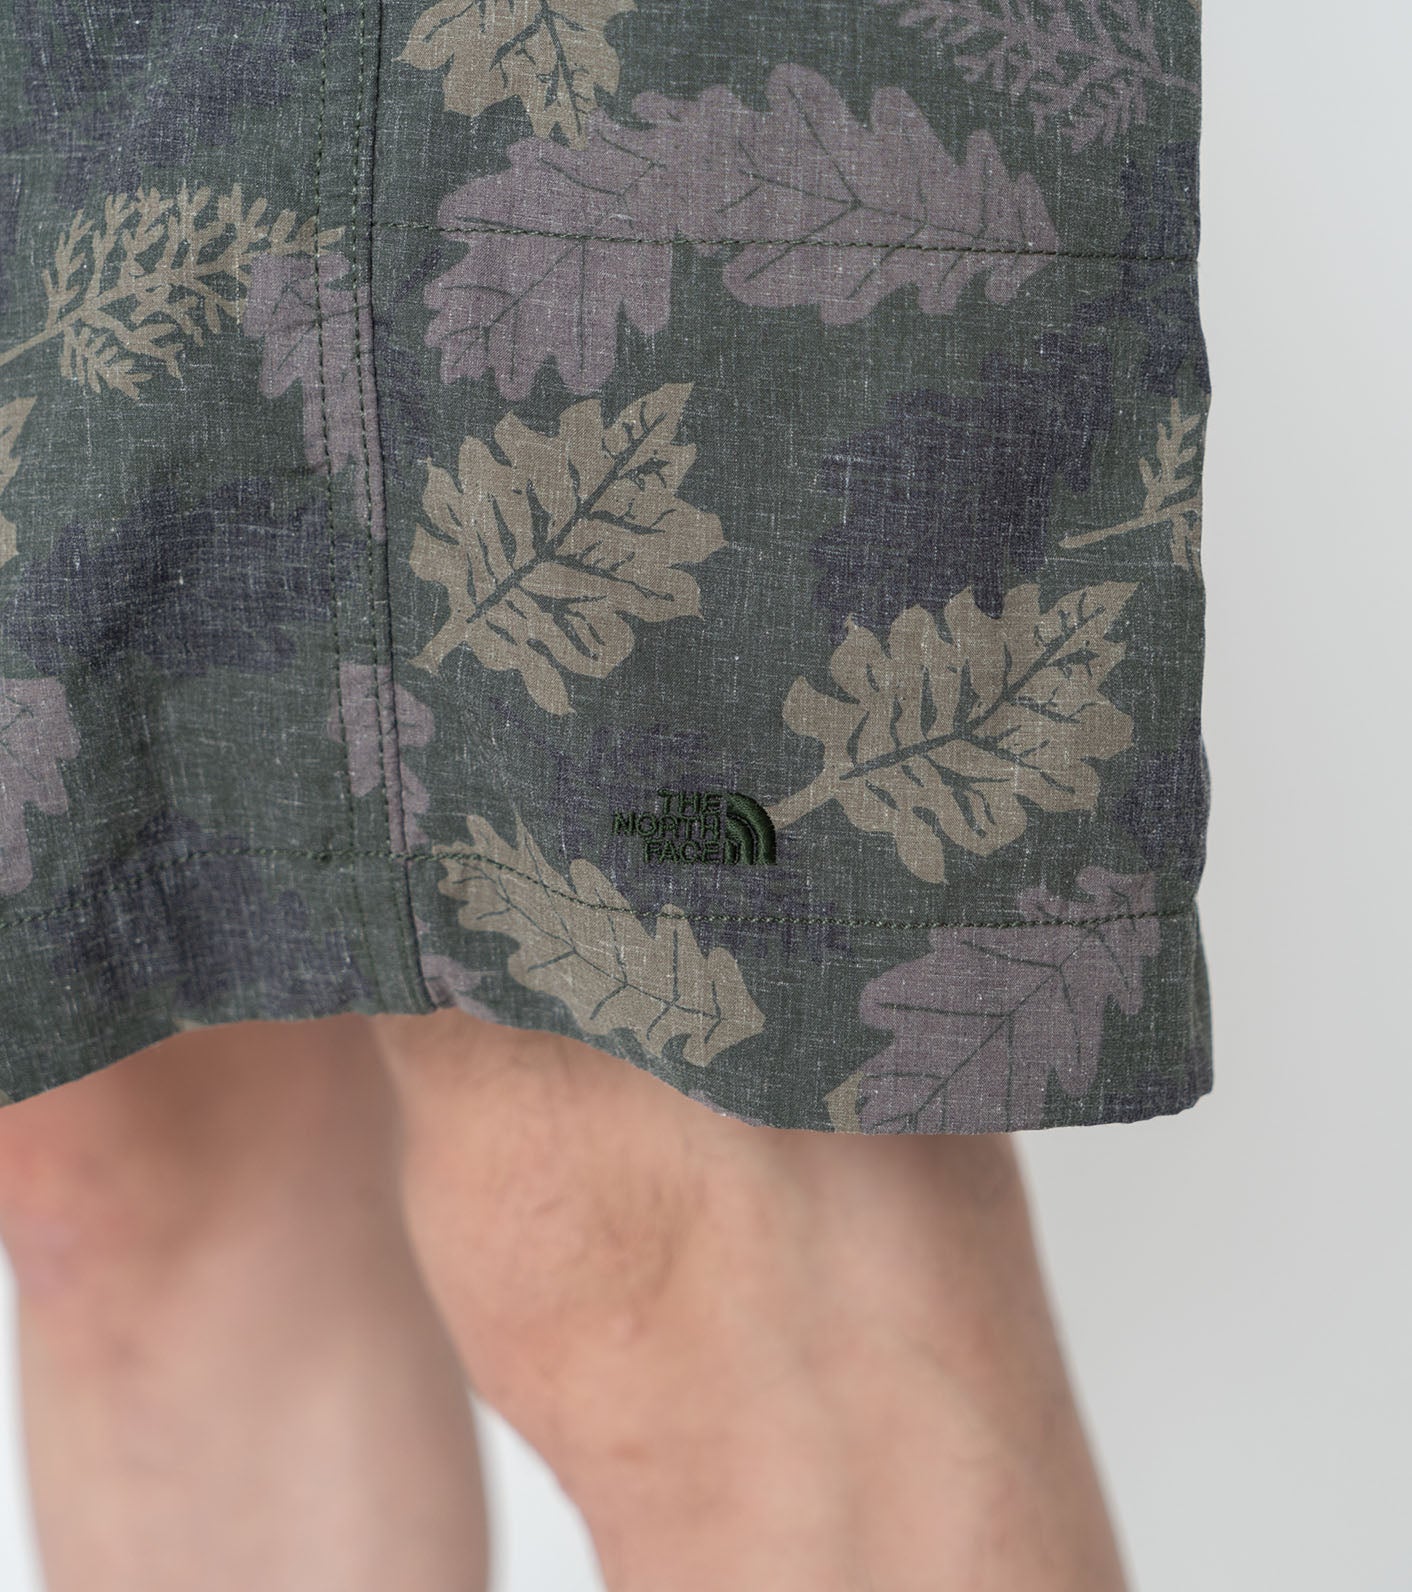 THE NORTH FACE PURPLE LABEL Polyester Linen Field Shorts